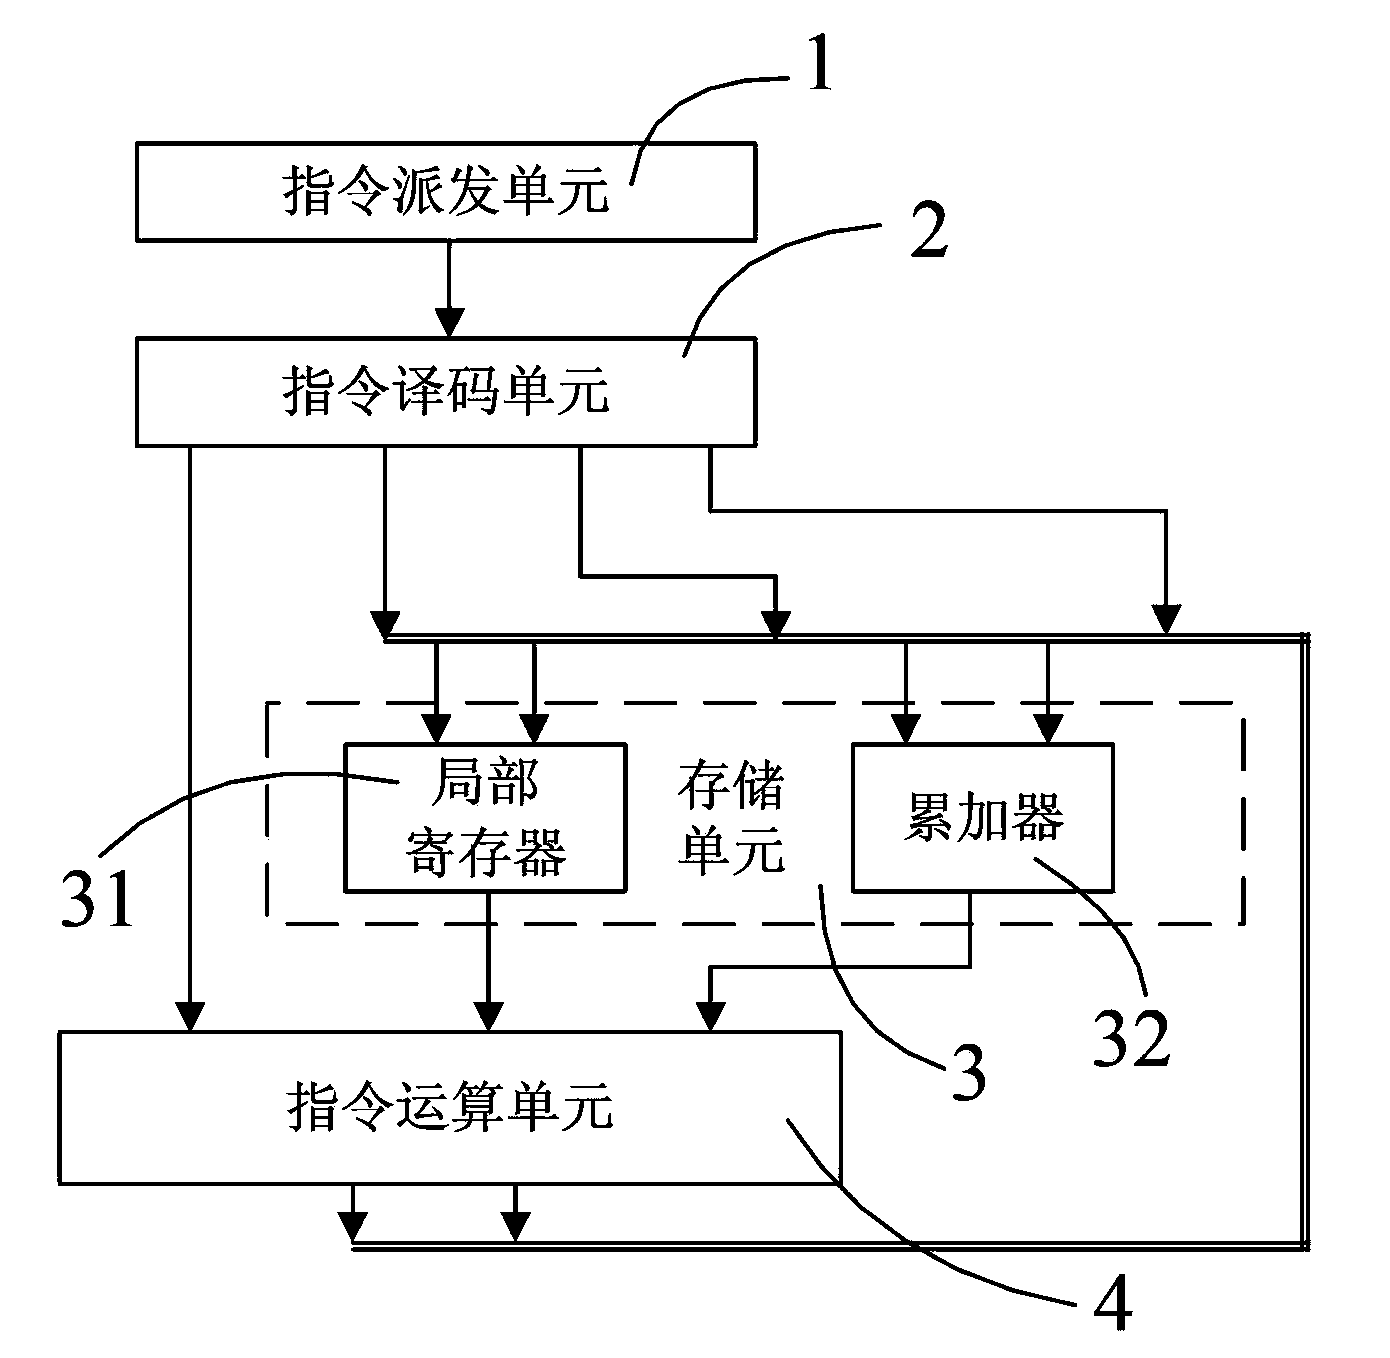 Multifunctional fixed-point media access control (MAC) operation device for microprocessor